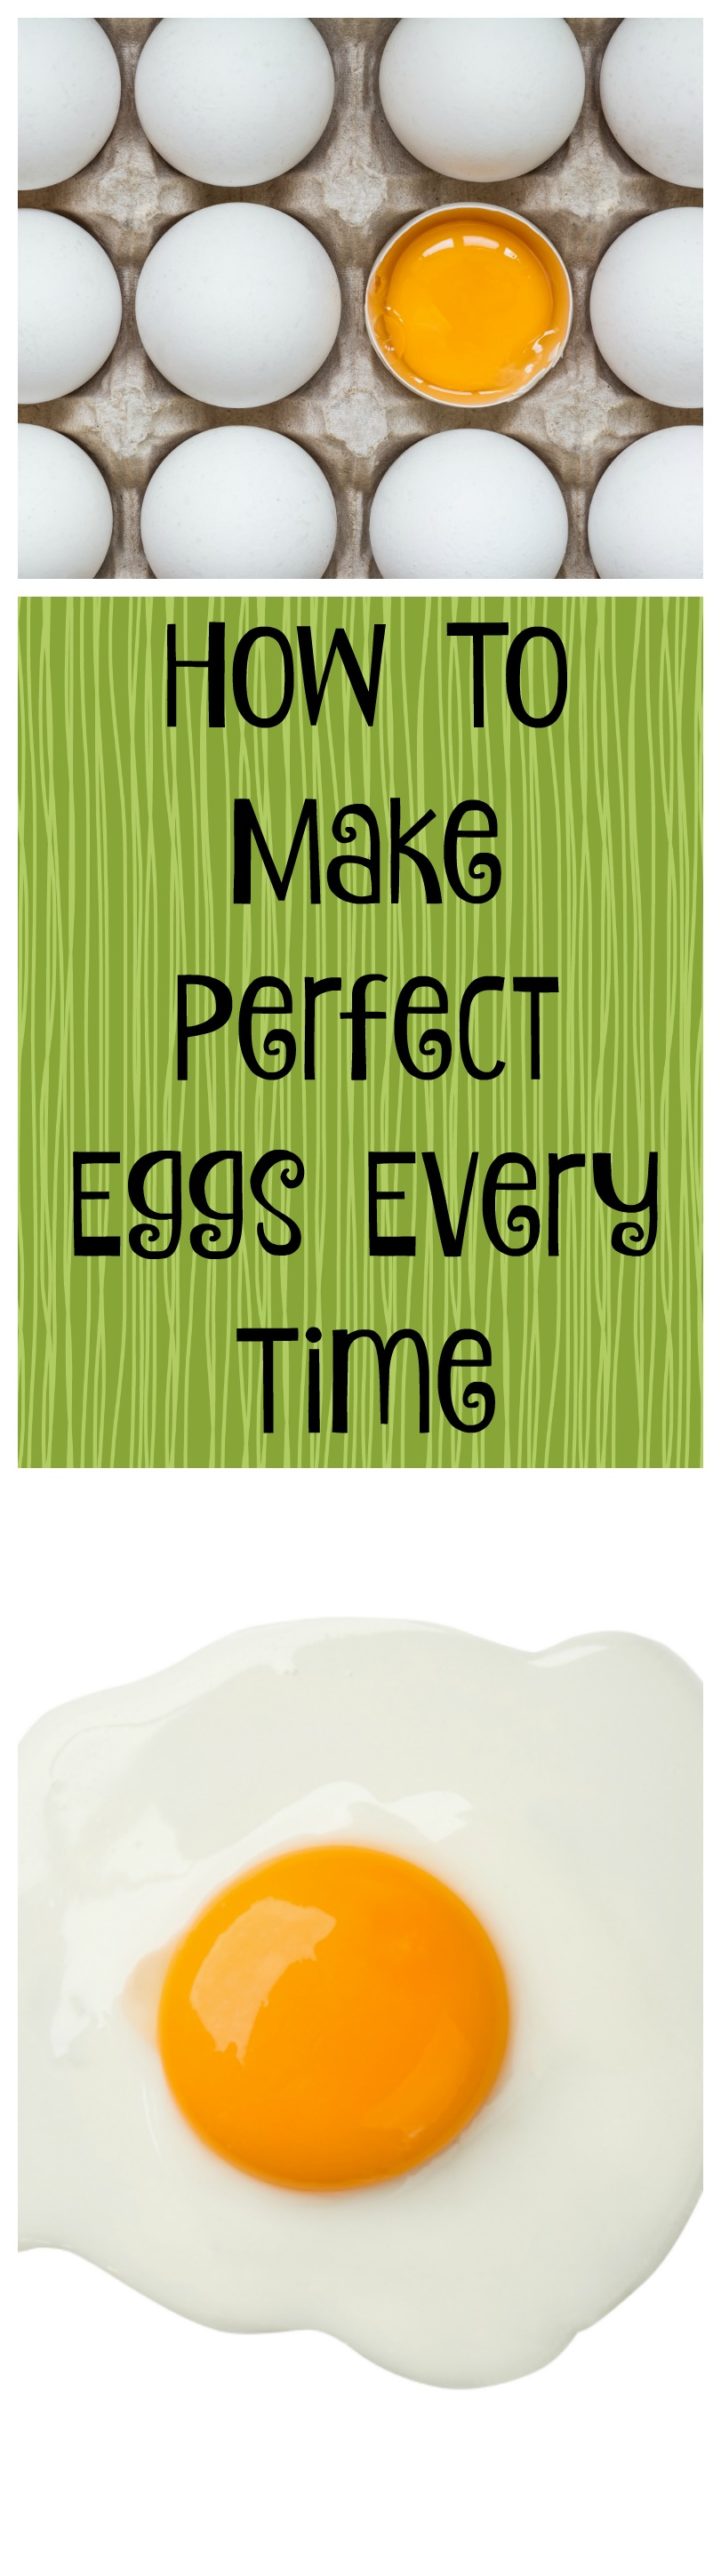 How To Make Perfect Eggs Every Time